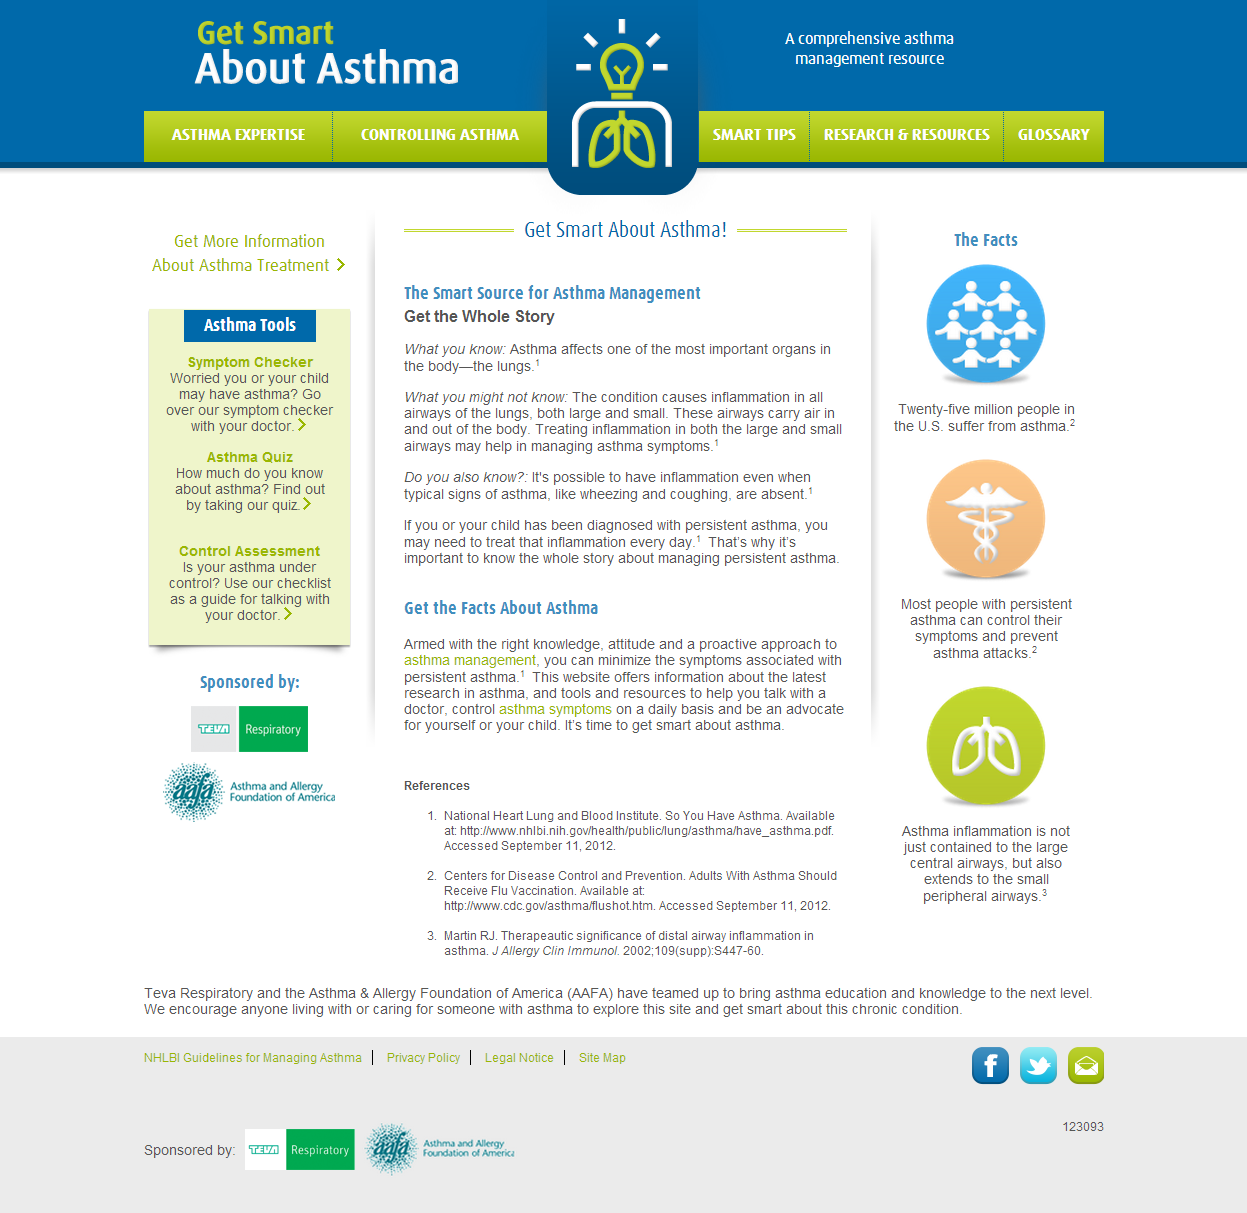 Get Smart About Asthma